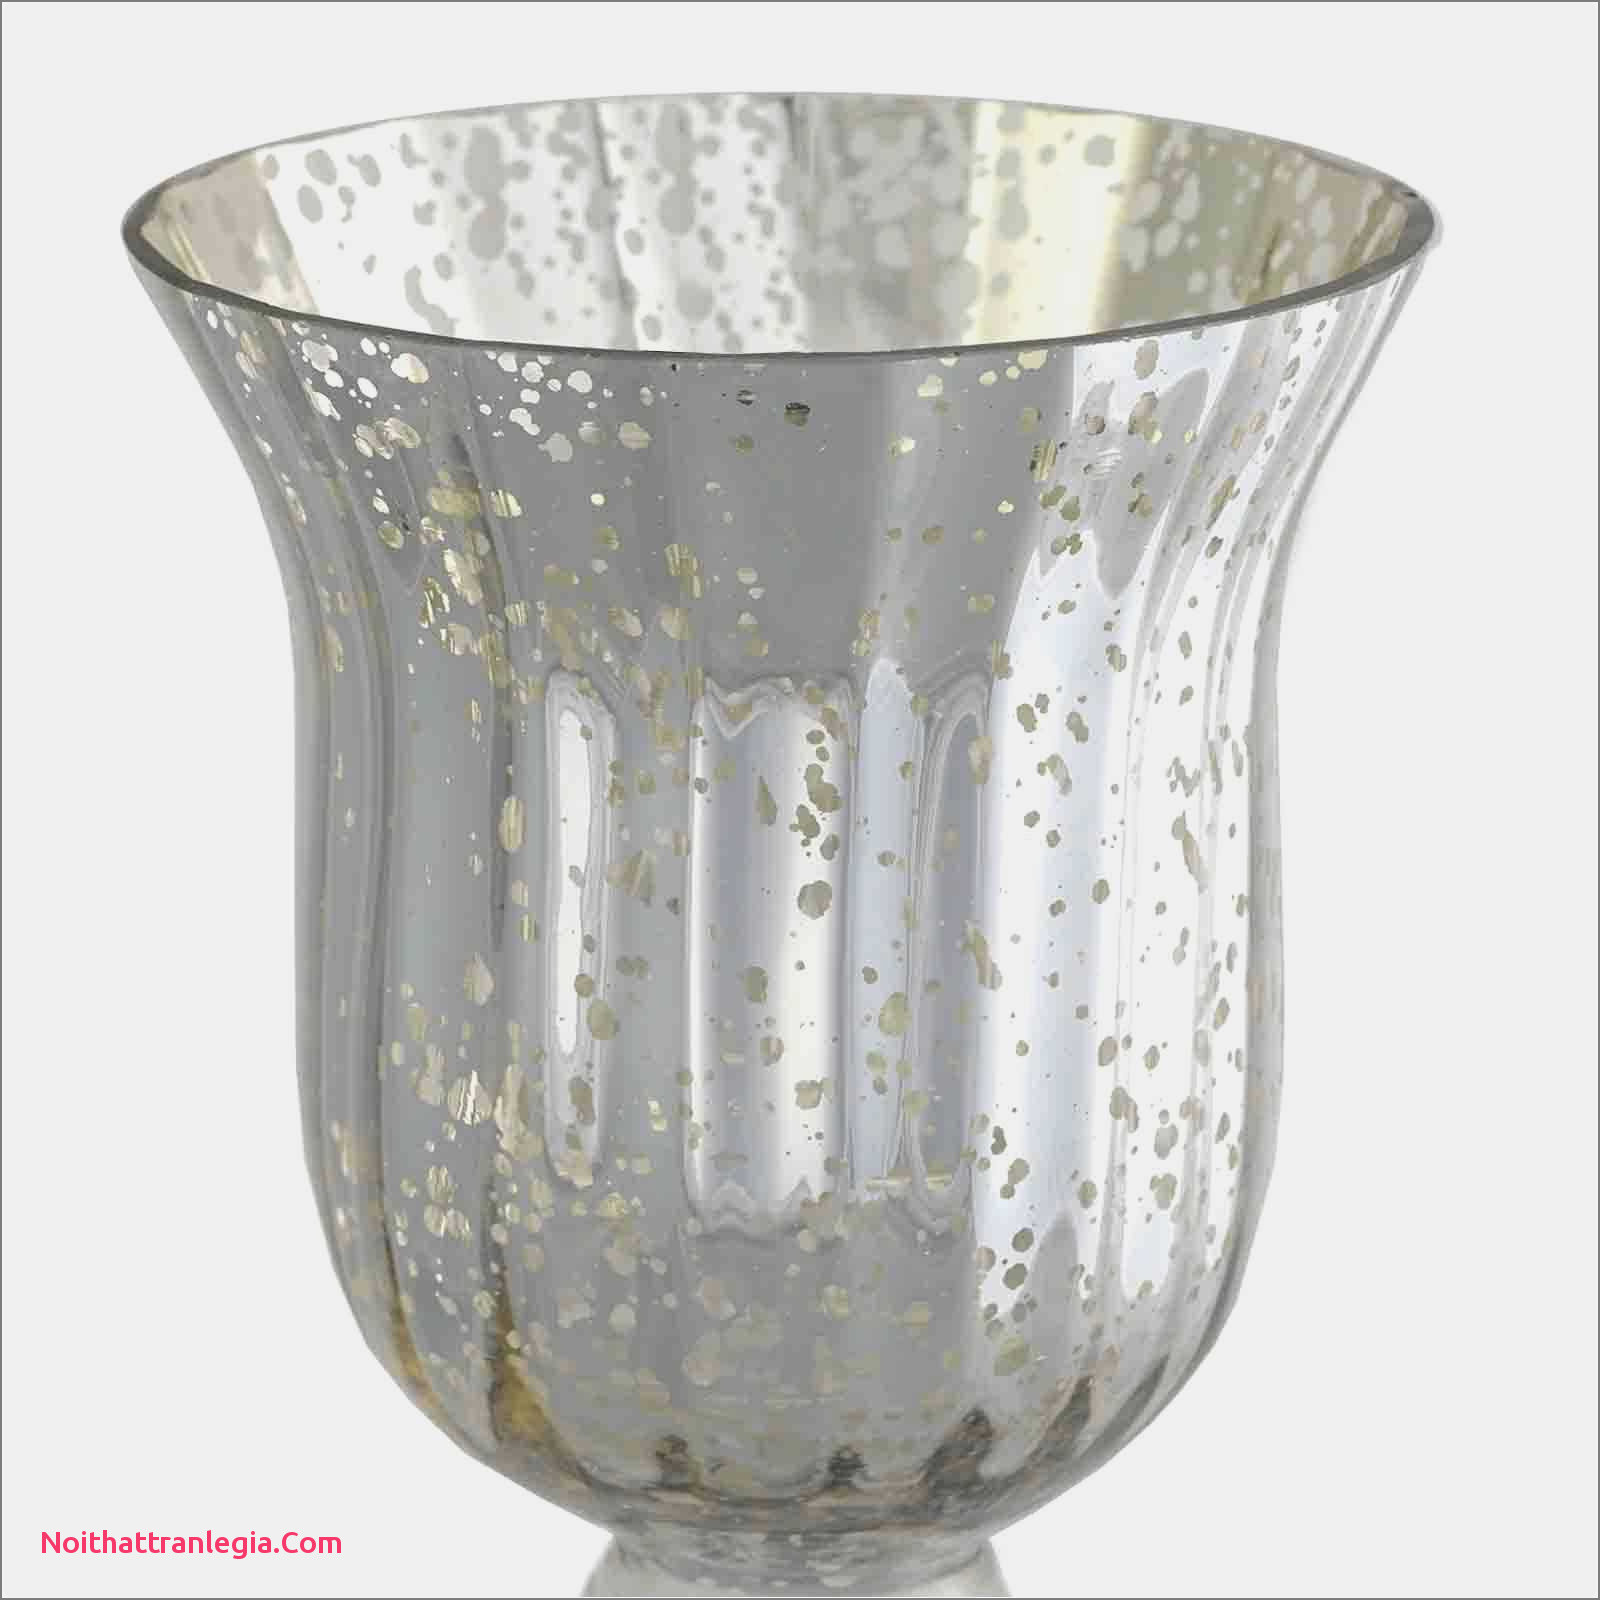 27 Famous Small Gold Vases Bulk 2024 free download small gold vases bulk of 20 wedding vases noithattranlegia vases design with regard to wedding guest gift ideas inspirational candles for wedding favors superb pe s5h vases candle vase i